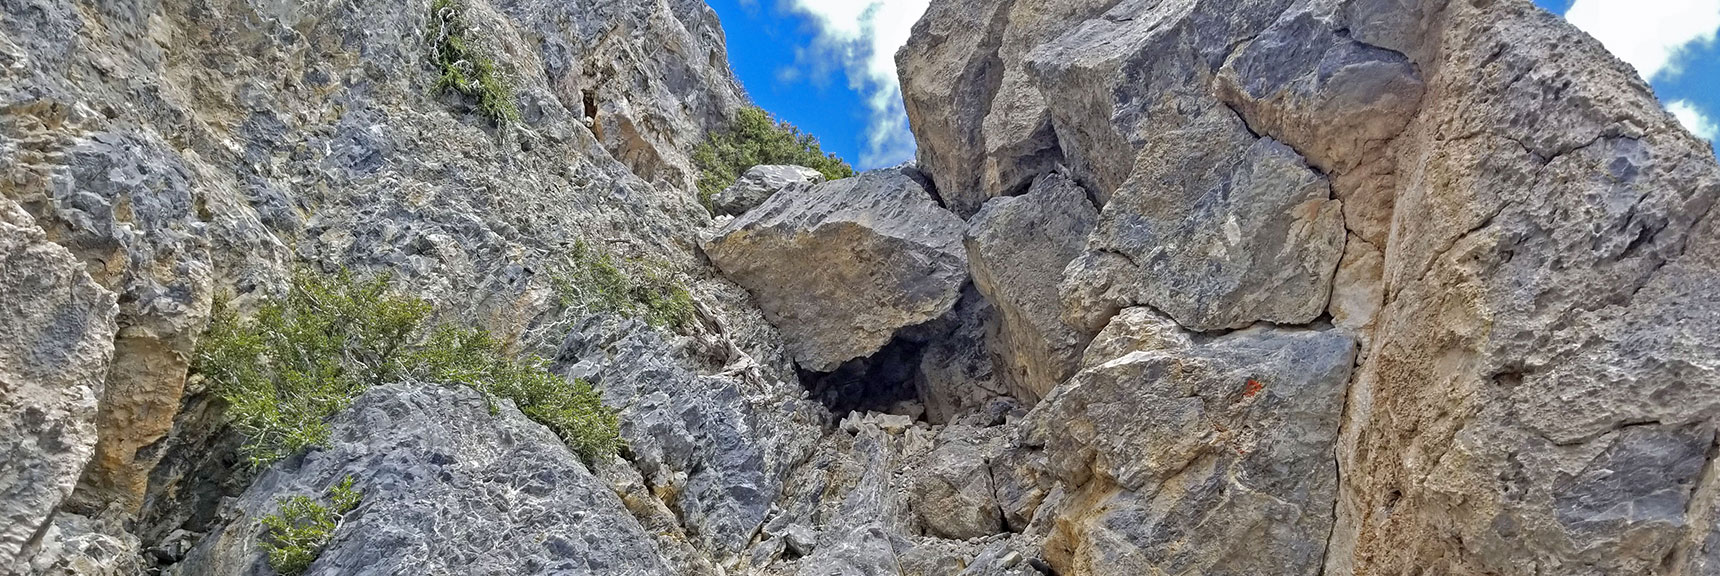 View Straight Up the Class 3 Final Summit Approach | The Sisters South | Lee Canyon | Mt Charleston Wilderness | Spring Mountains, Nevada